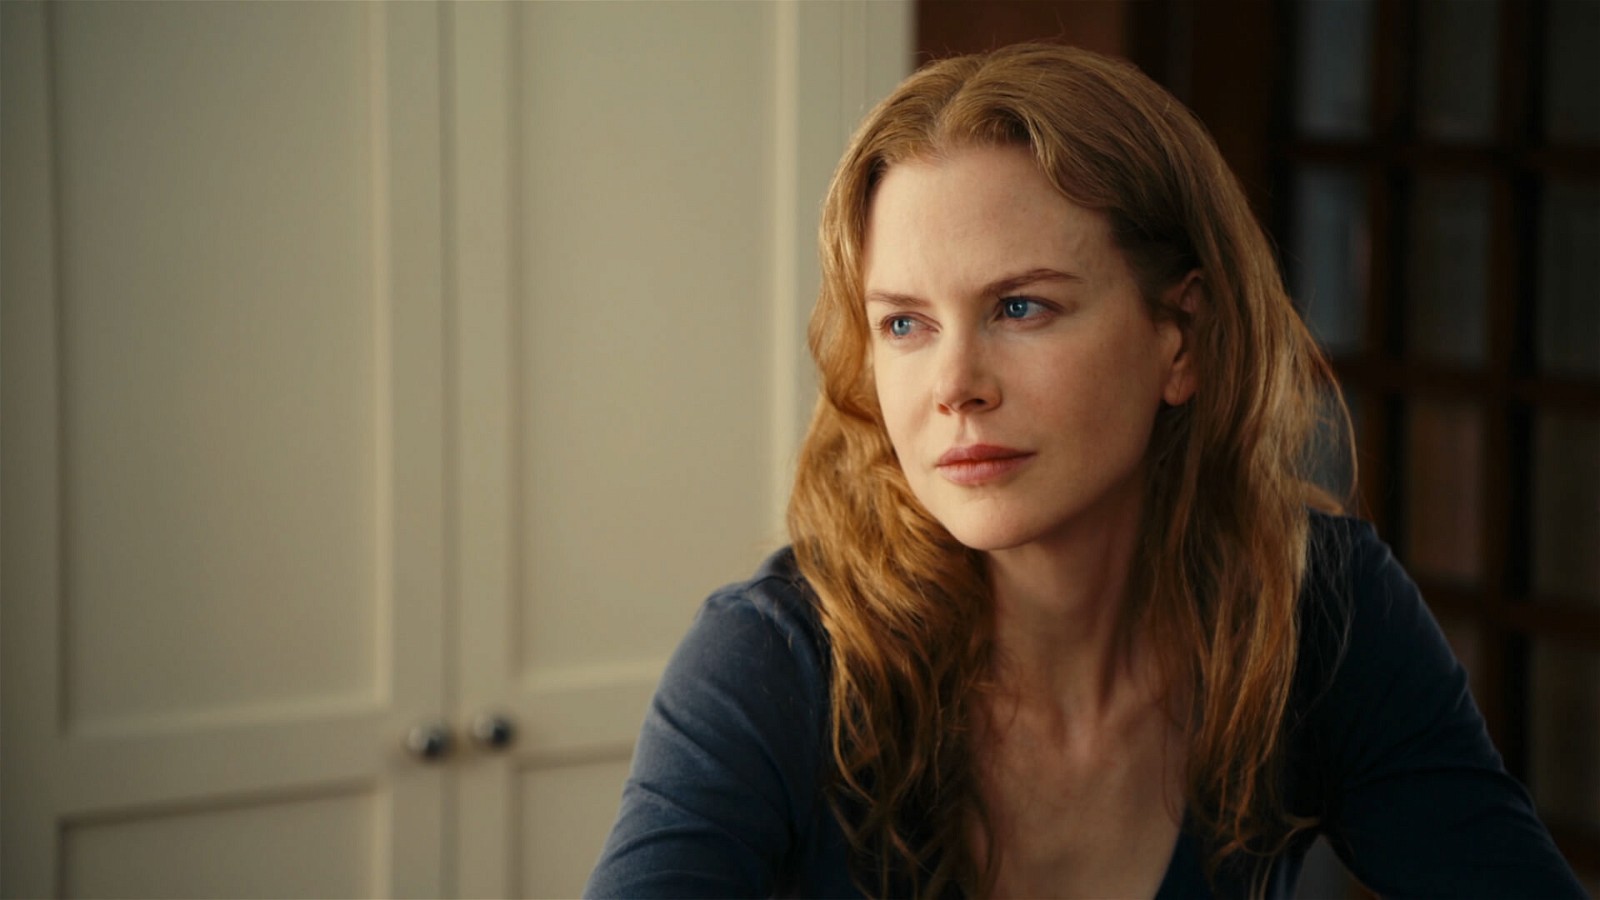 Nicole Kidman also played a mother coping with the loss of her child in Rabbit Hole